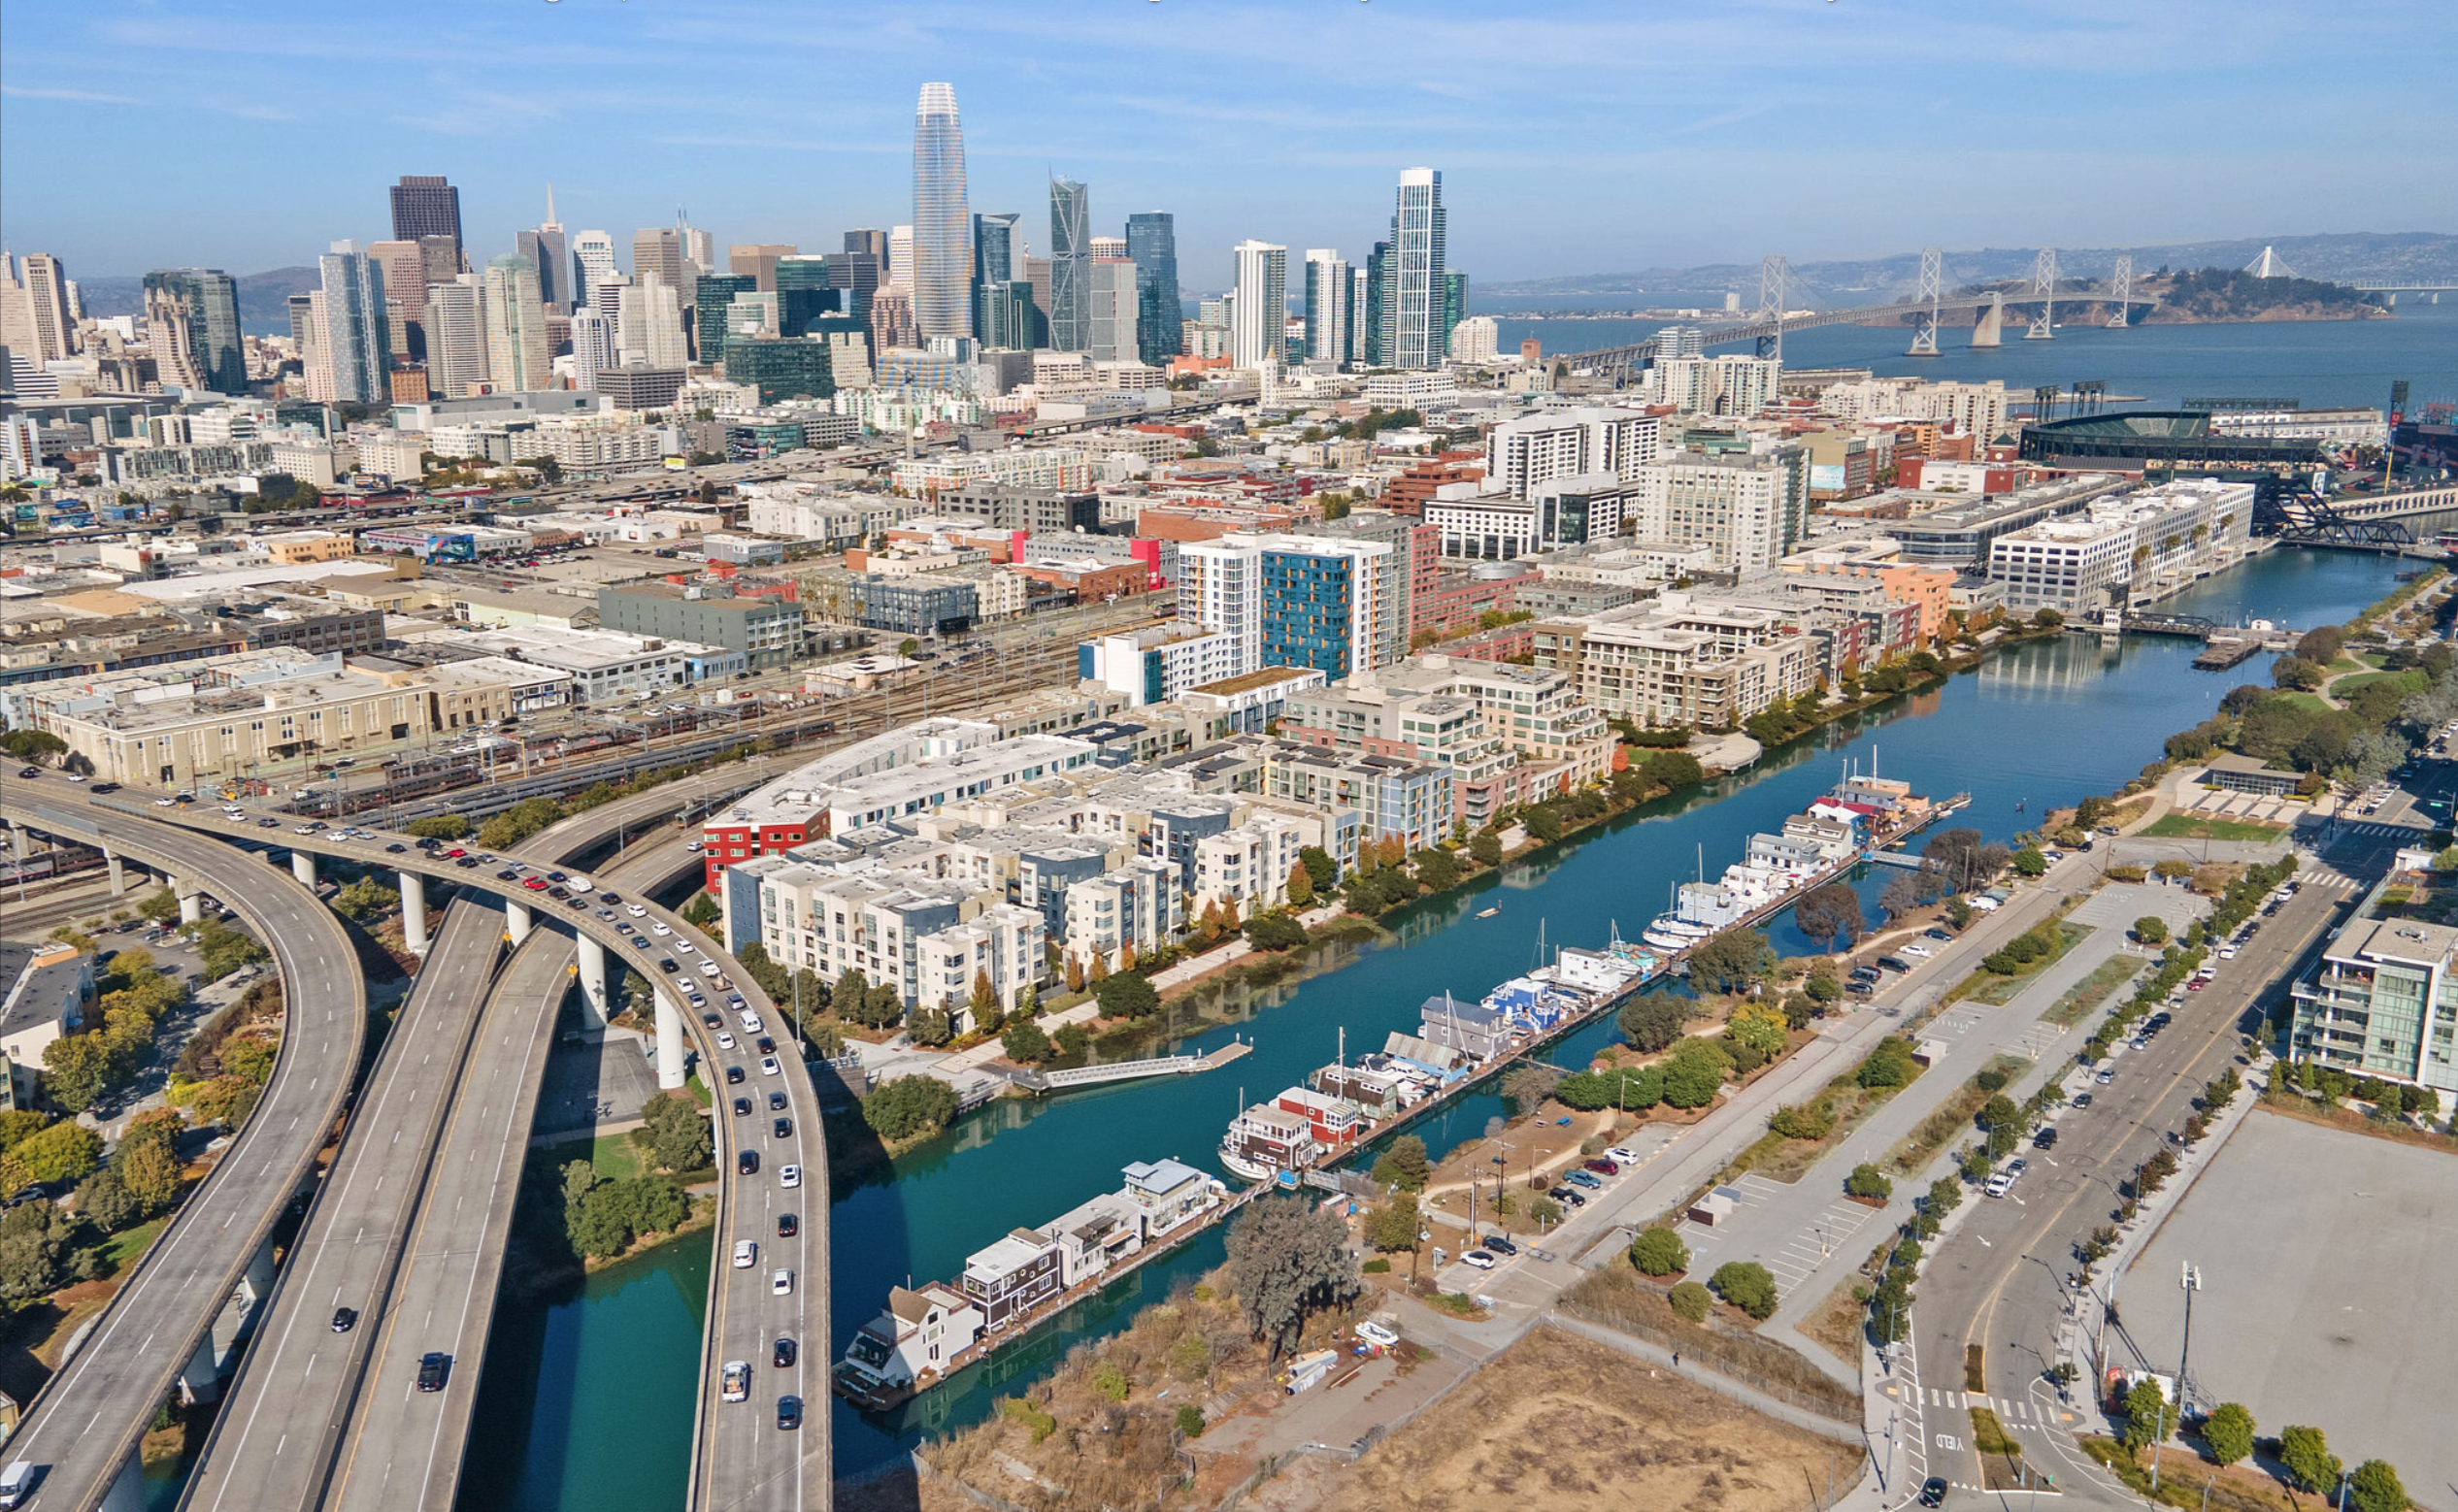 An aerial view shows Mission Creek in San Francisco.